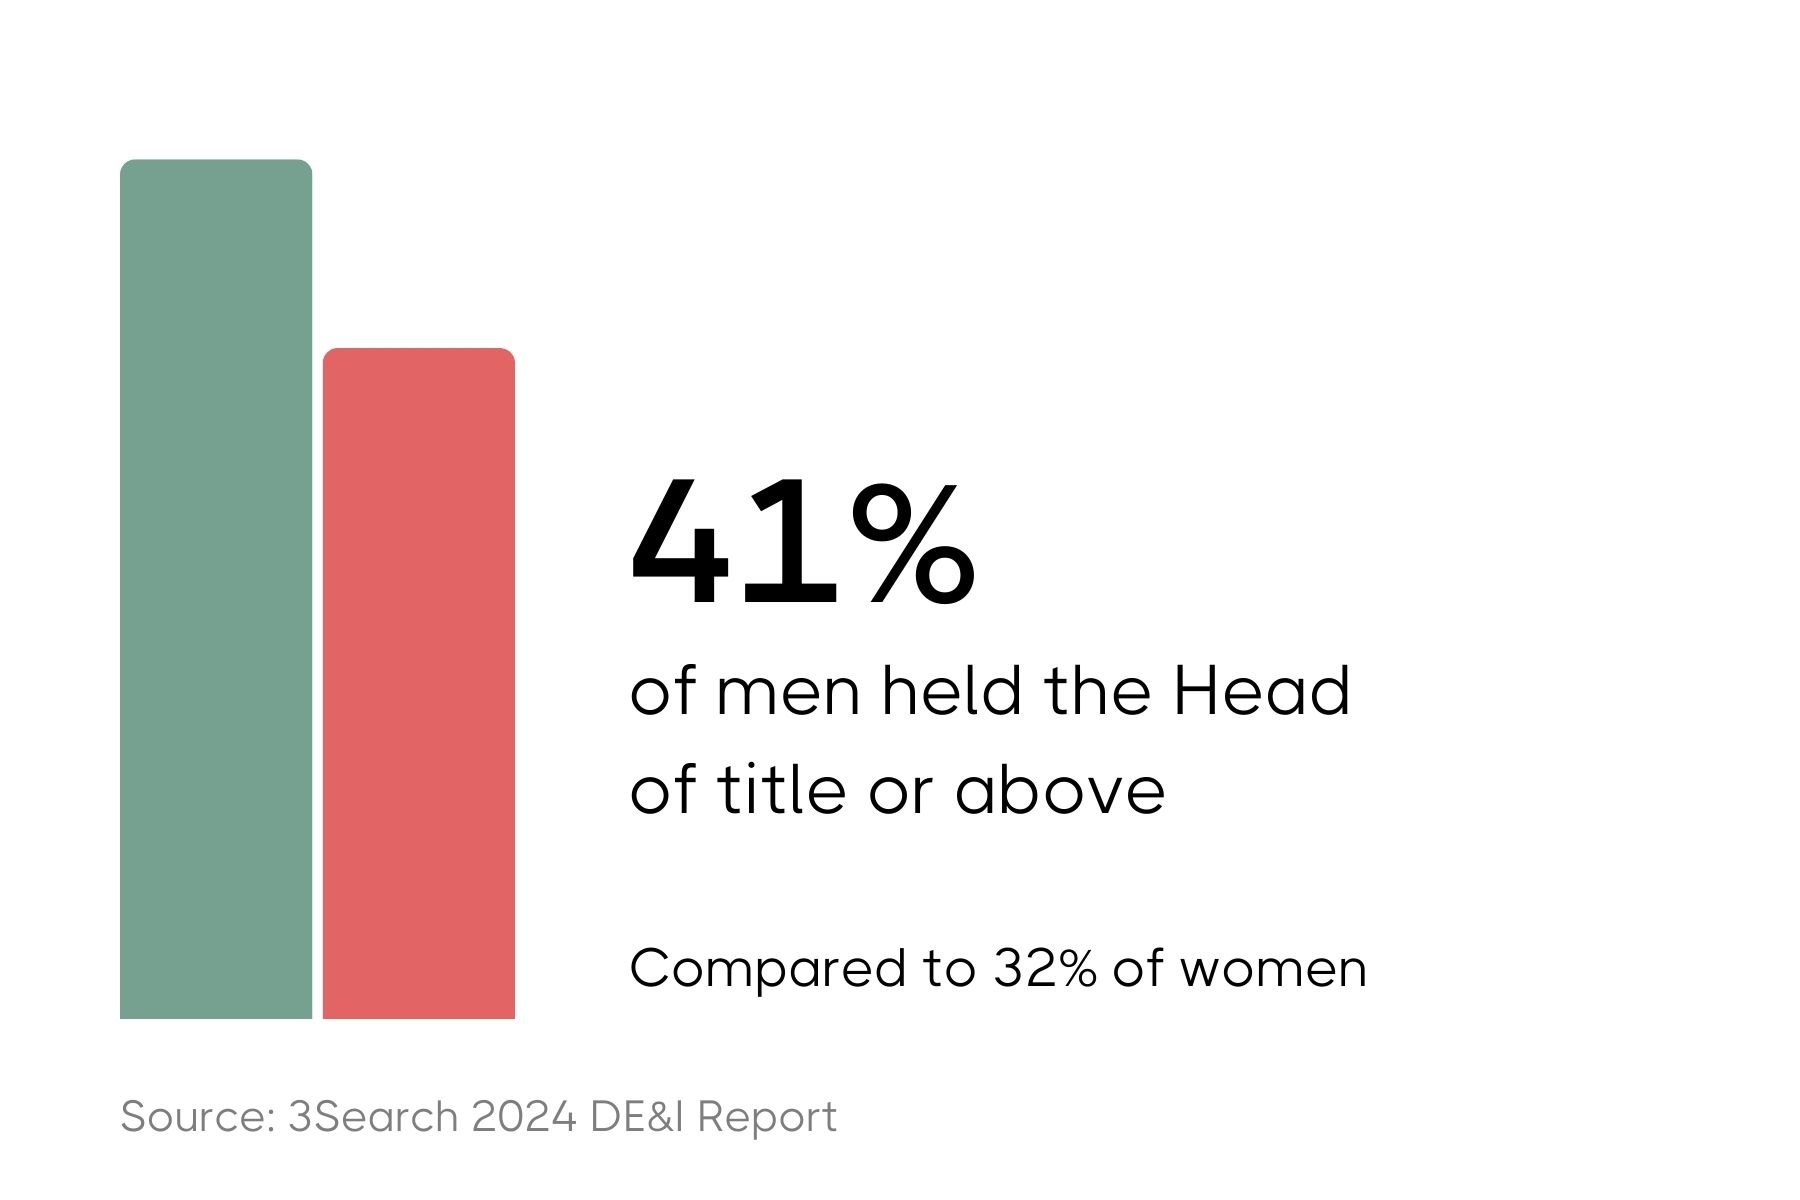 Bar graph illustrating gender disparity in leadership roles based on the 3Search 2024 DE&I Report. The graph shows two bars: a green bar representing 41% of men holding a Head of title or higher positions, and a red bar showing 32% of women in similar roles, indicating a gap in leadership opportunities between genders.